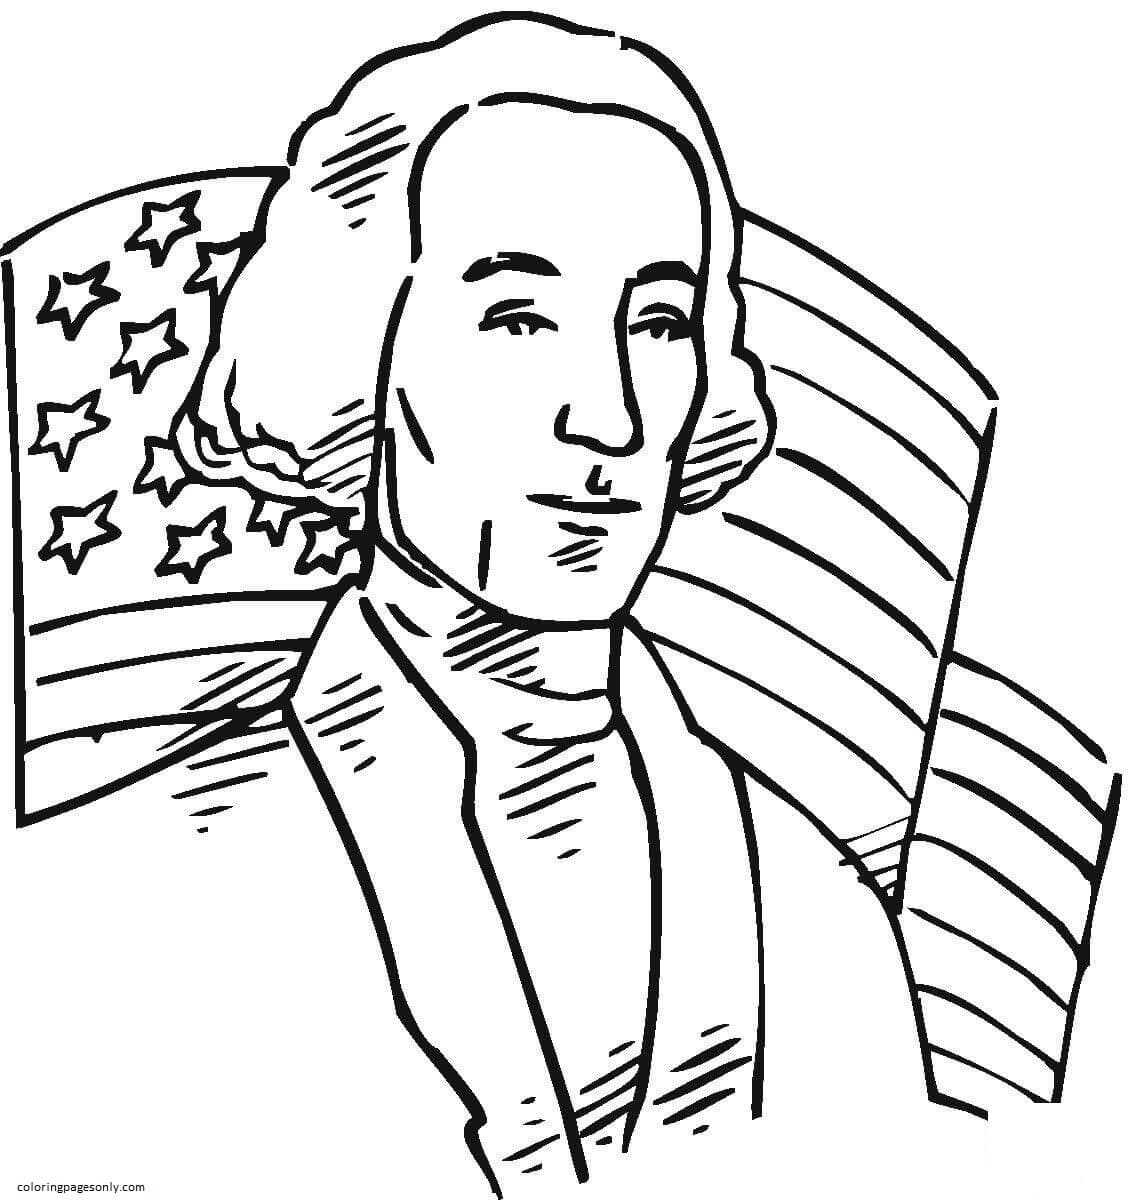 George Washington first president of United States Coloring Page